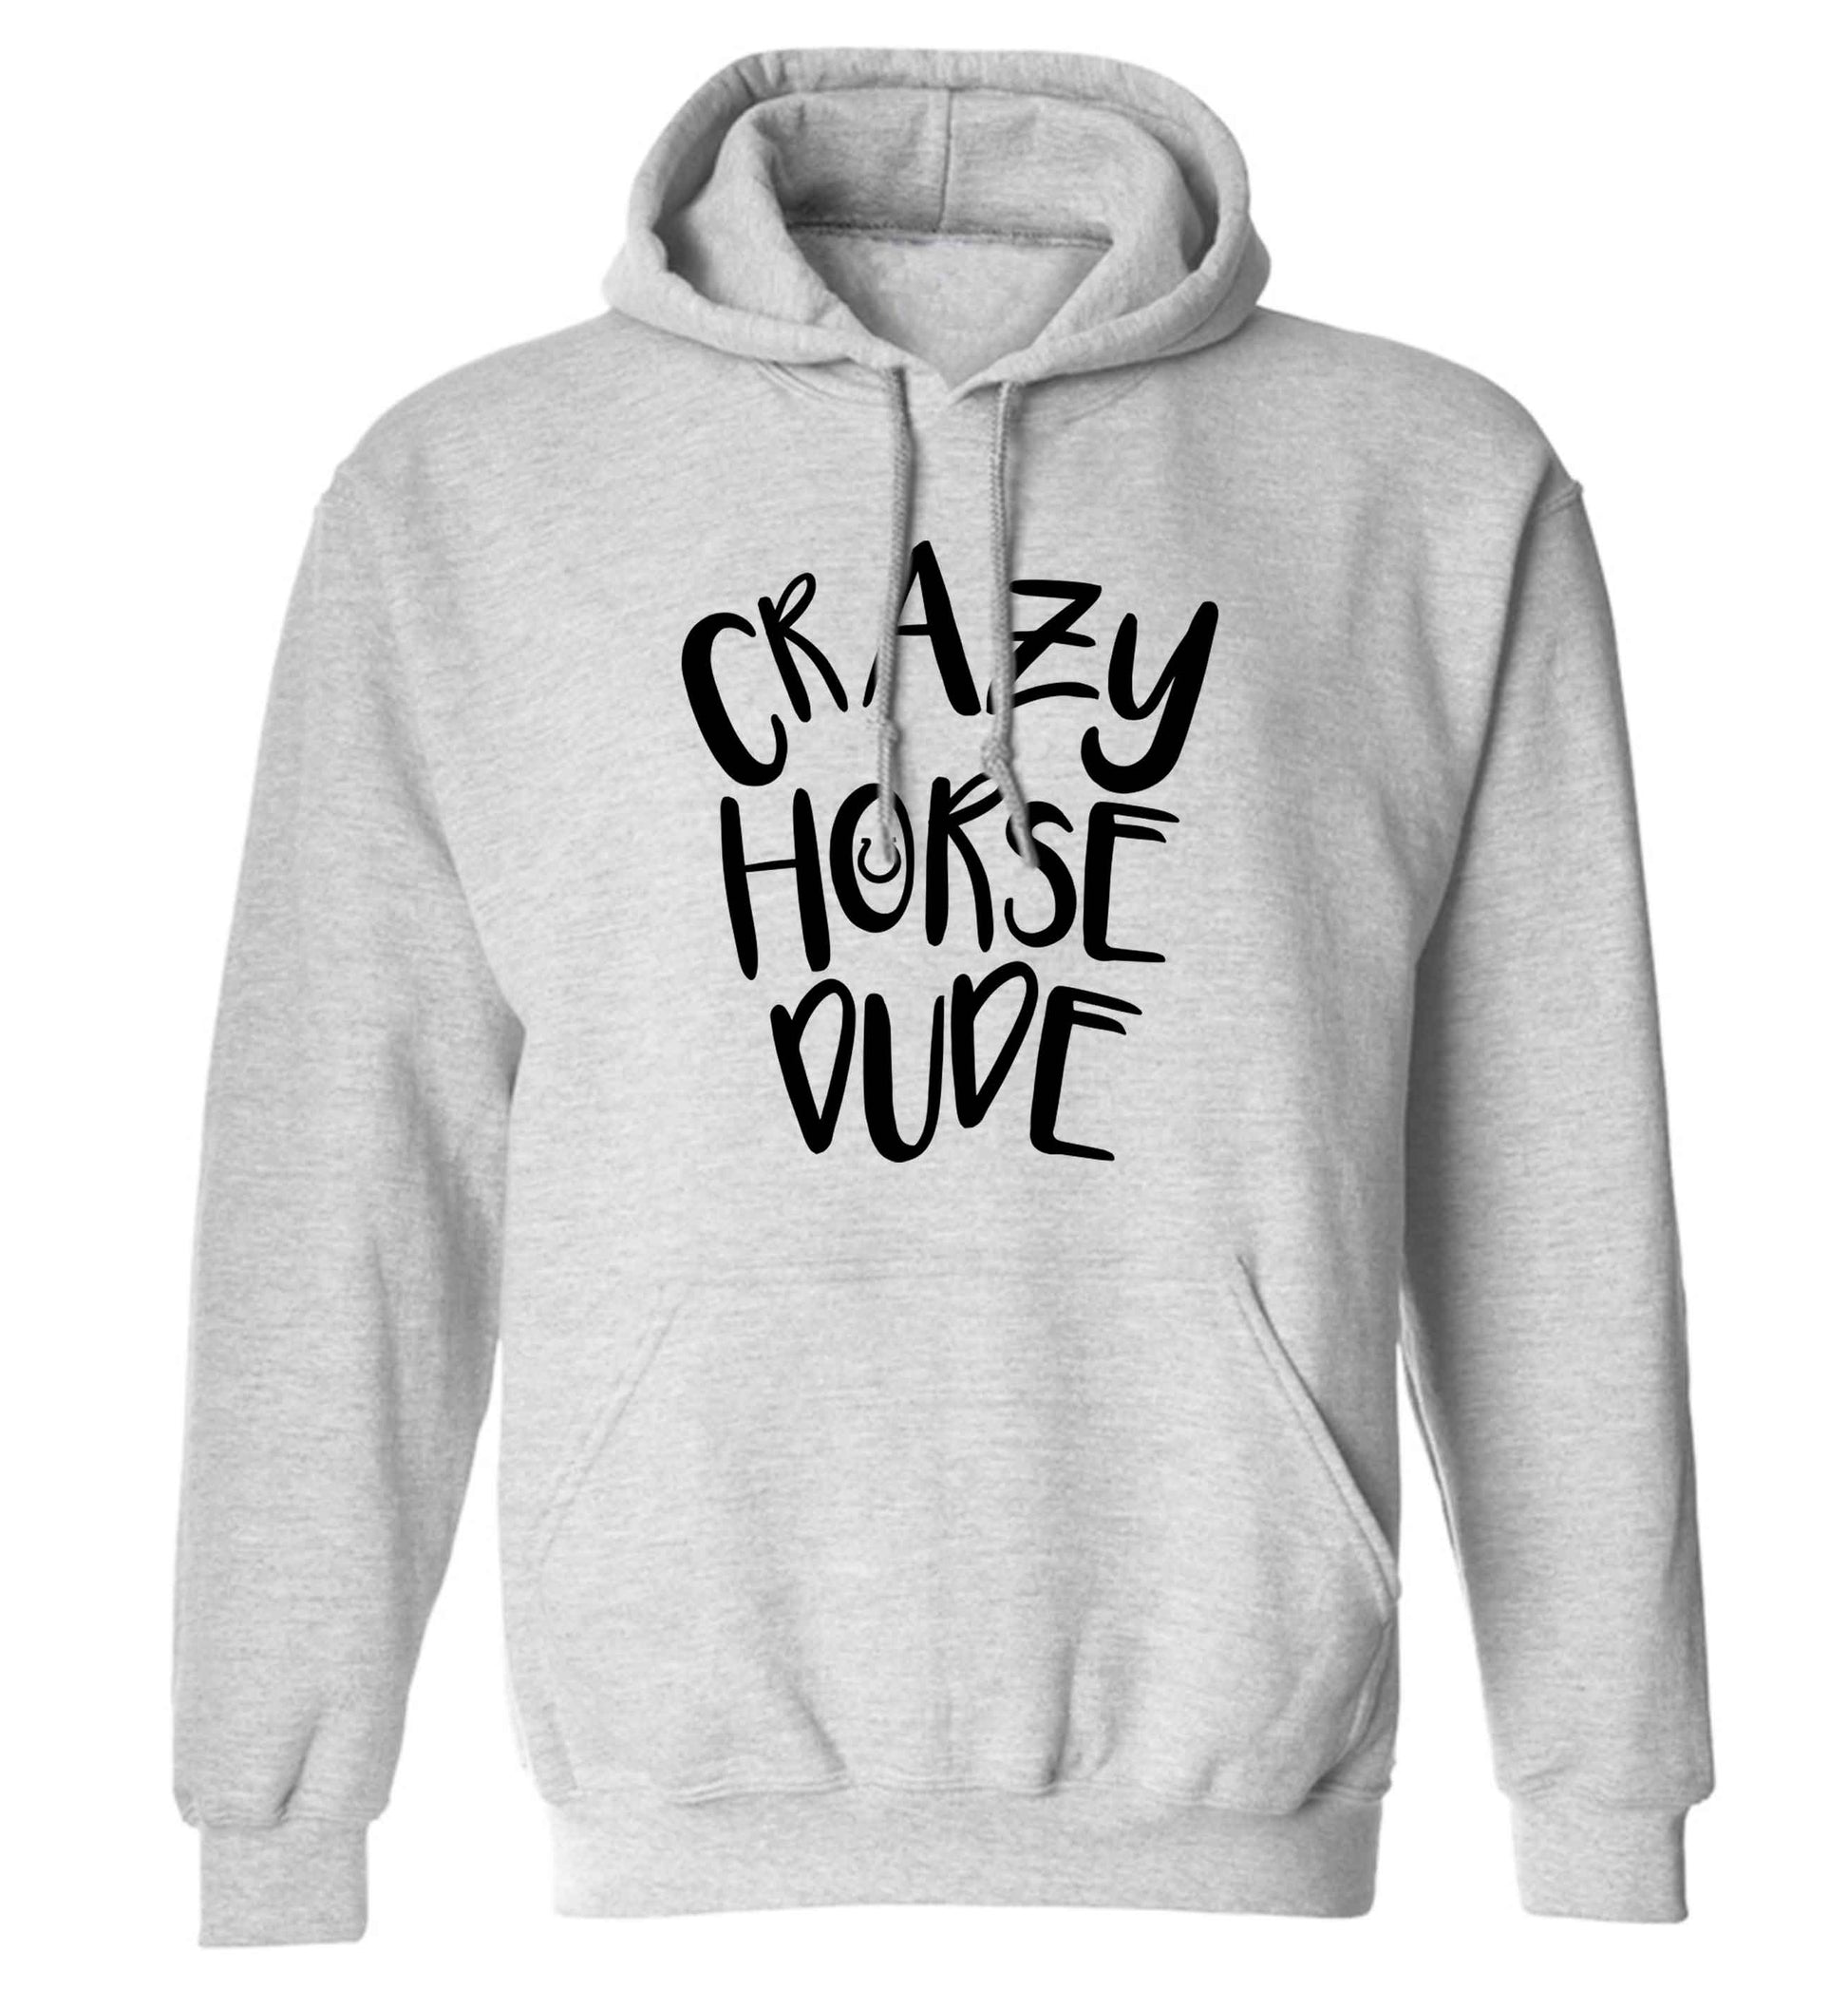 Crazy horse dude adults unisex grey hoodie 2XL